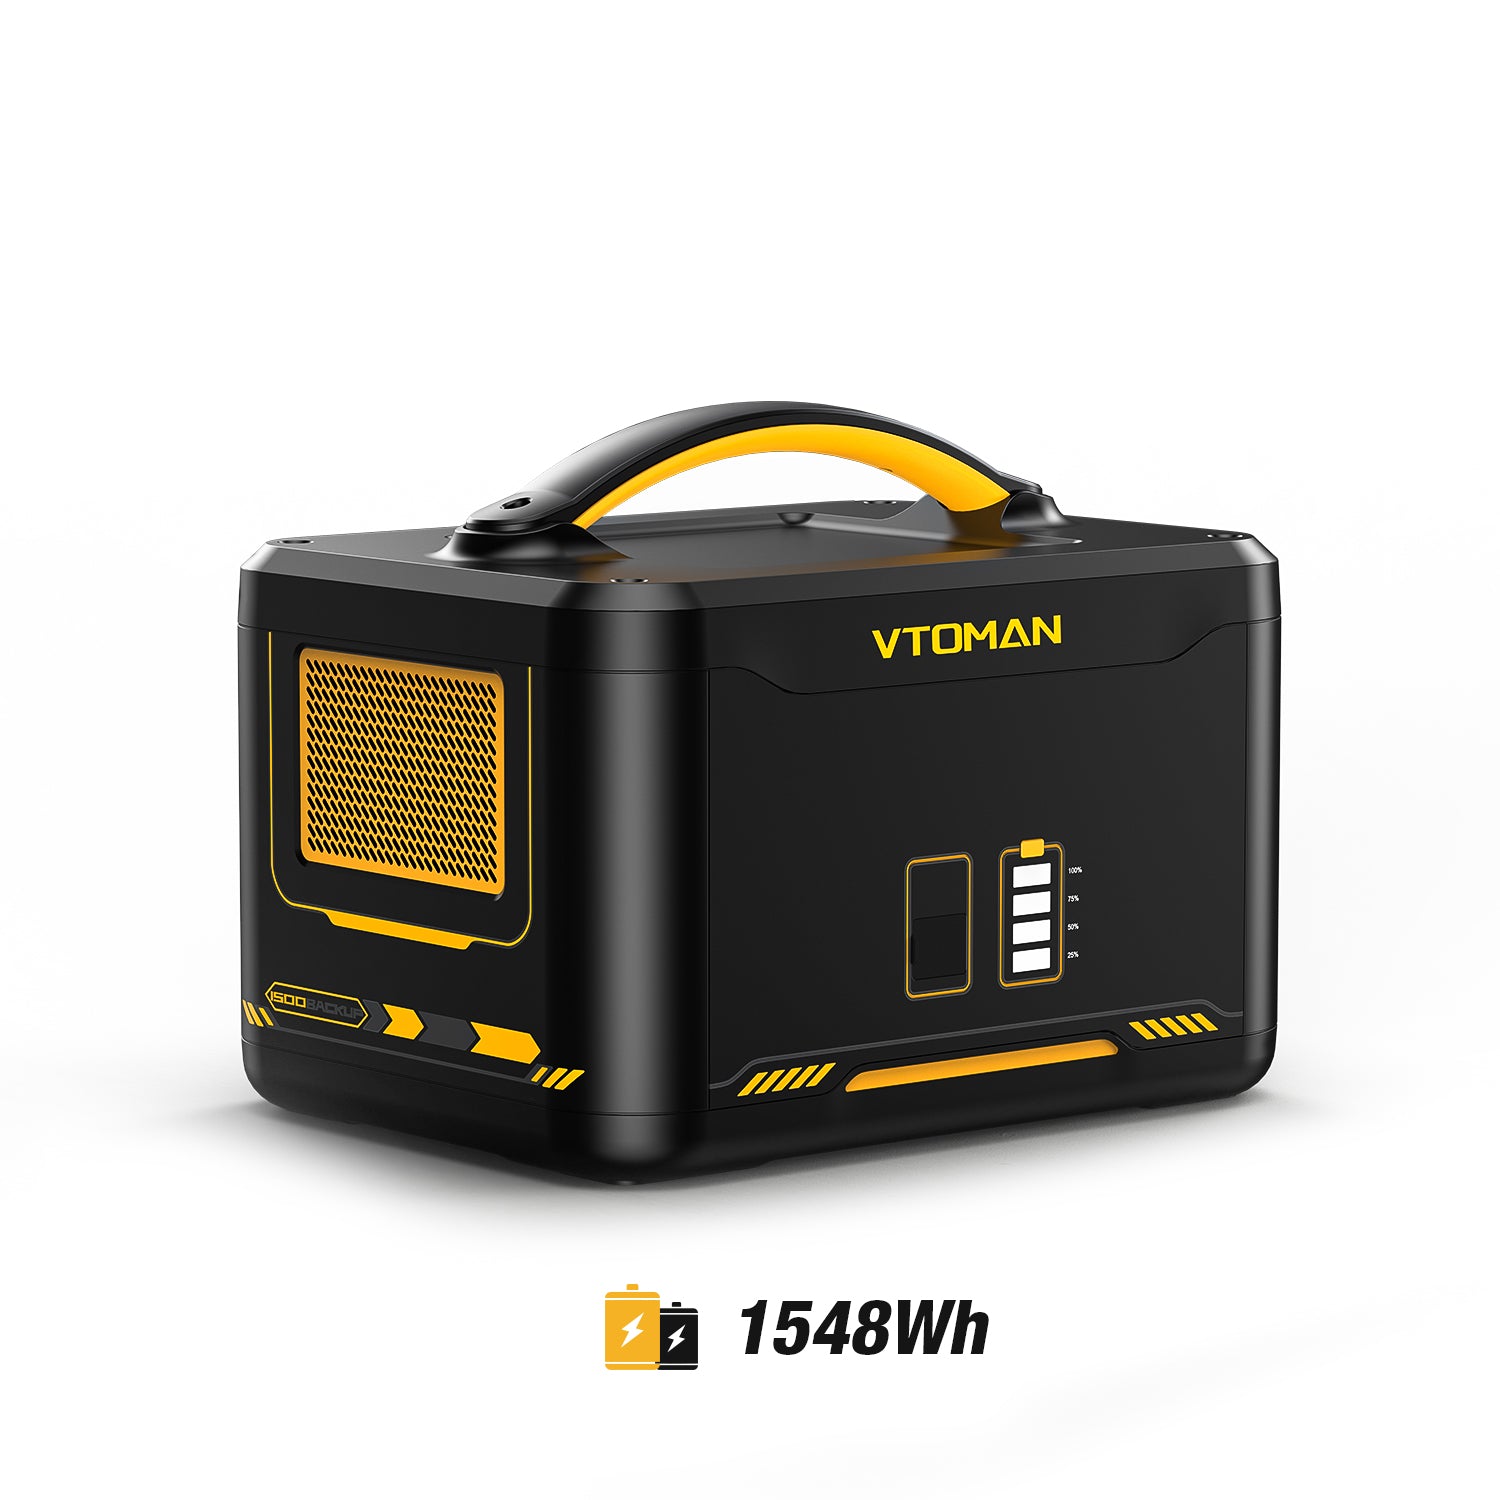 Jump 1500W/828Wh 220W Solargenerator